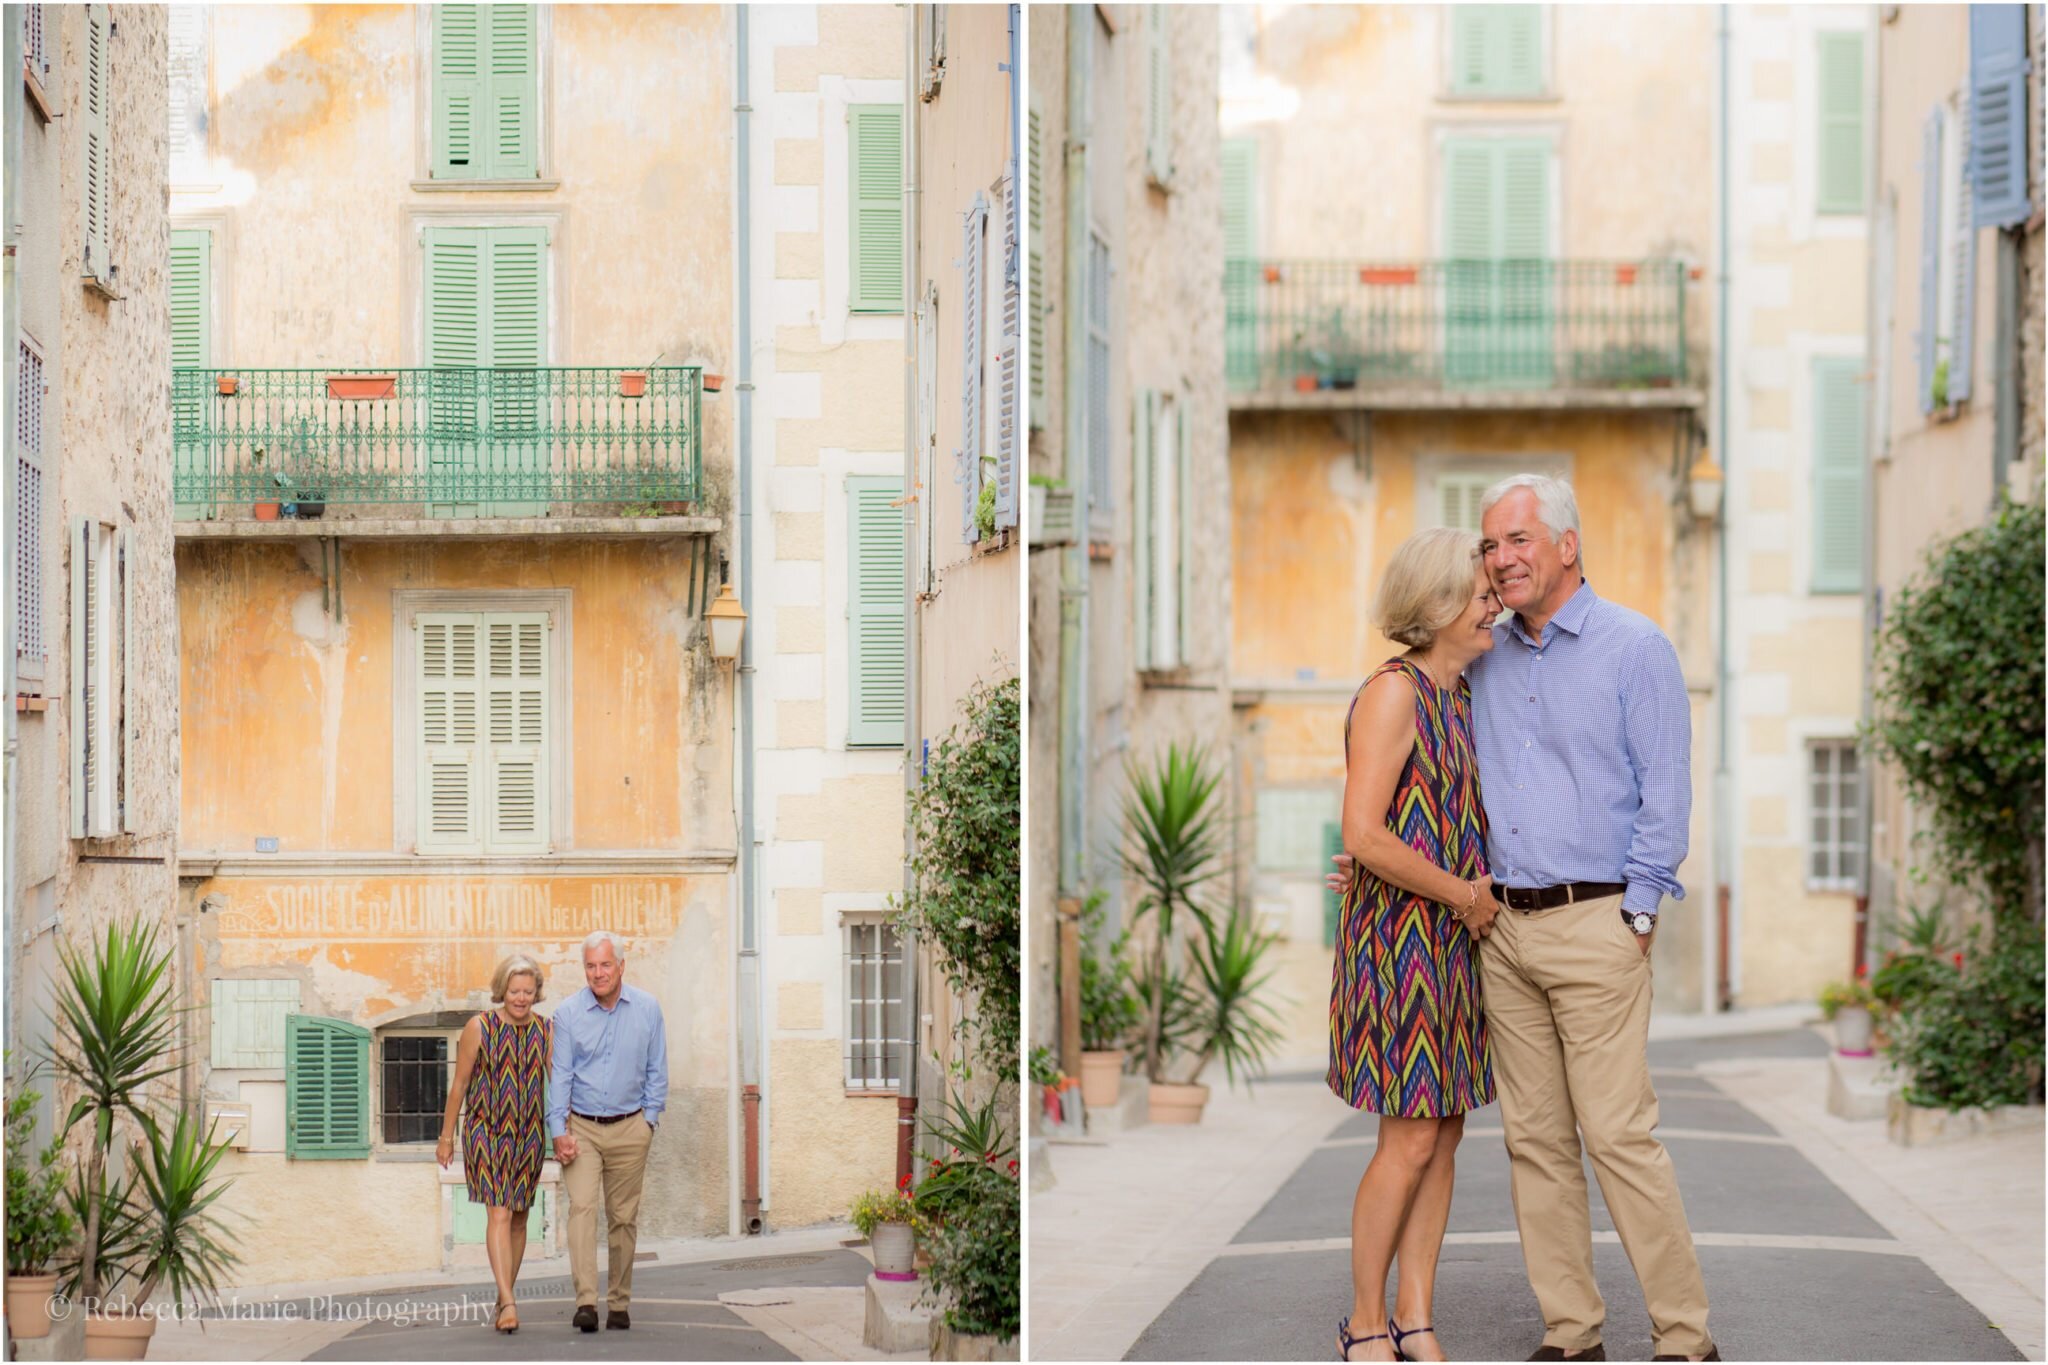 Portraits-in-France-Valbonne-Rebecca-Marie-Photography-18-3-1